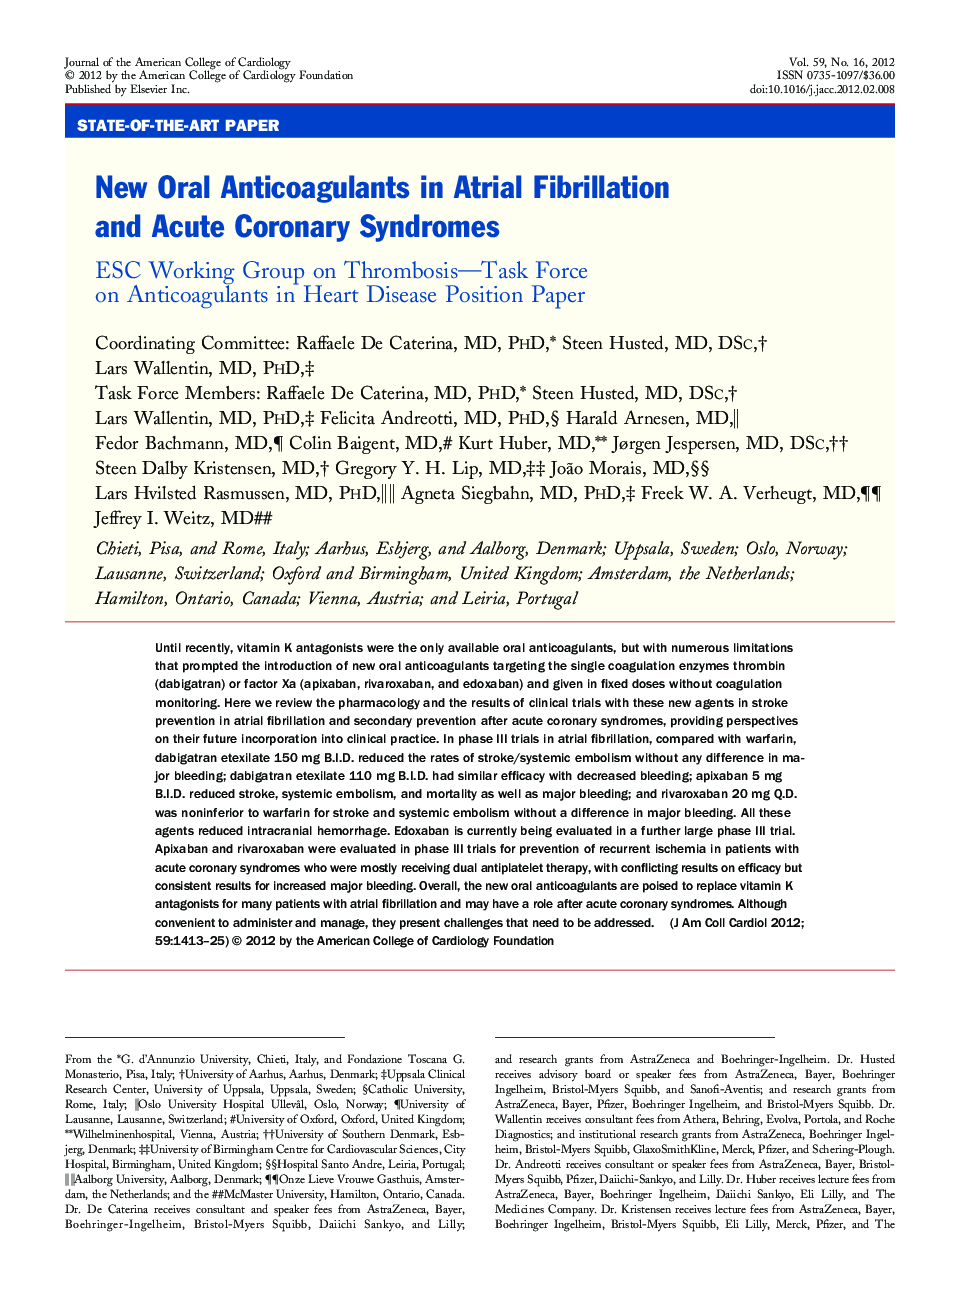 New Oral Anticoagulants in Atrial Fibrillation and Acute Coronary Syndromes : ESC Working Group on Thrombosis—Task Force on Anticoagulants in Heart Disease Position Paper